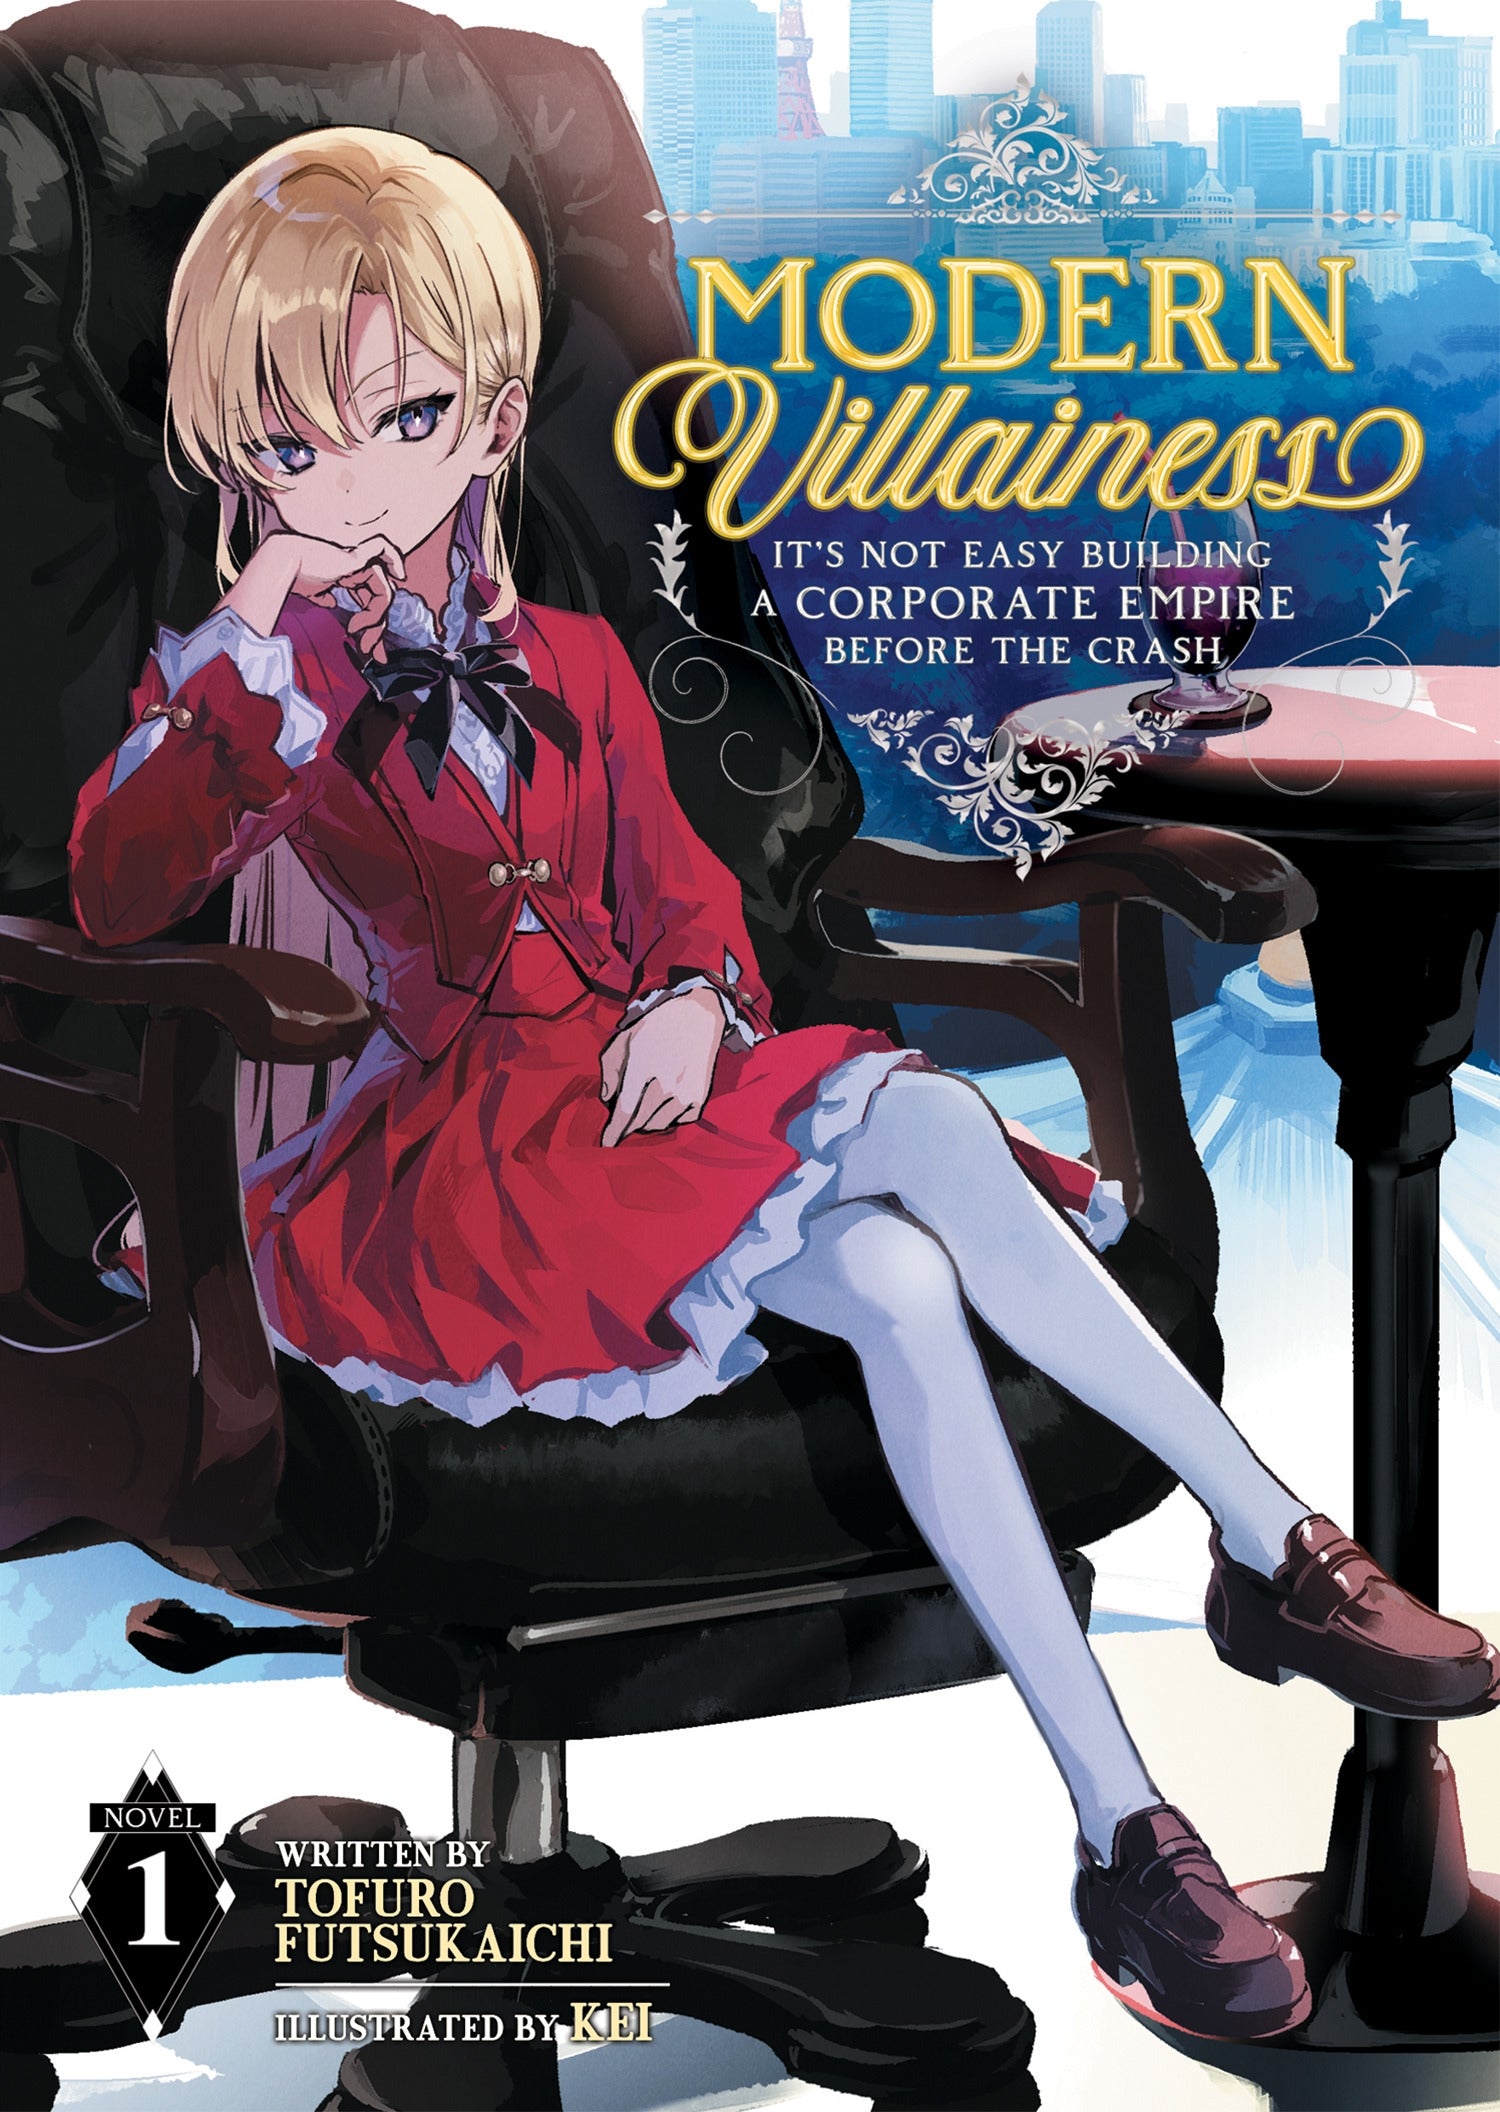 Modern Villainess: It's Not Easy Building a Corporate Empire Before the Crash [Light Novel] Vol. 1